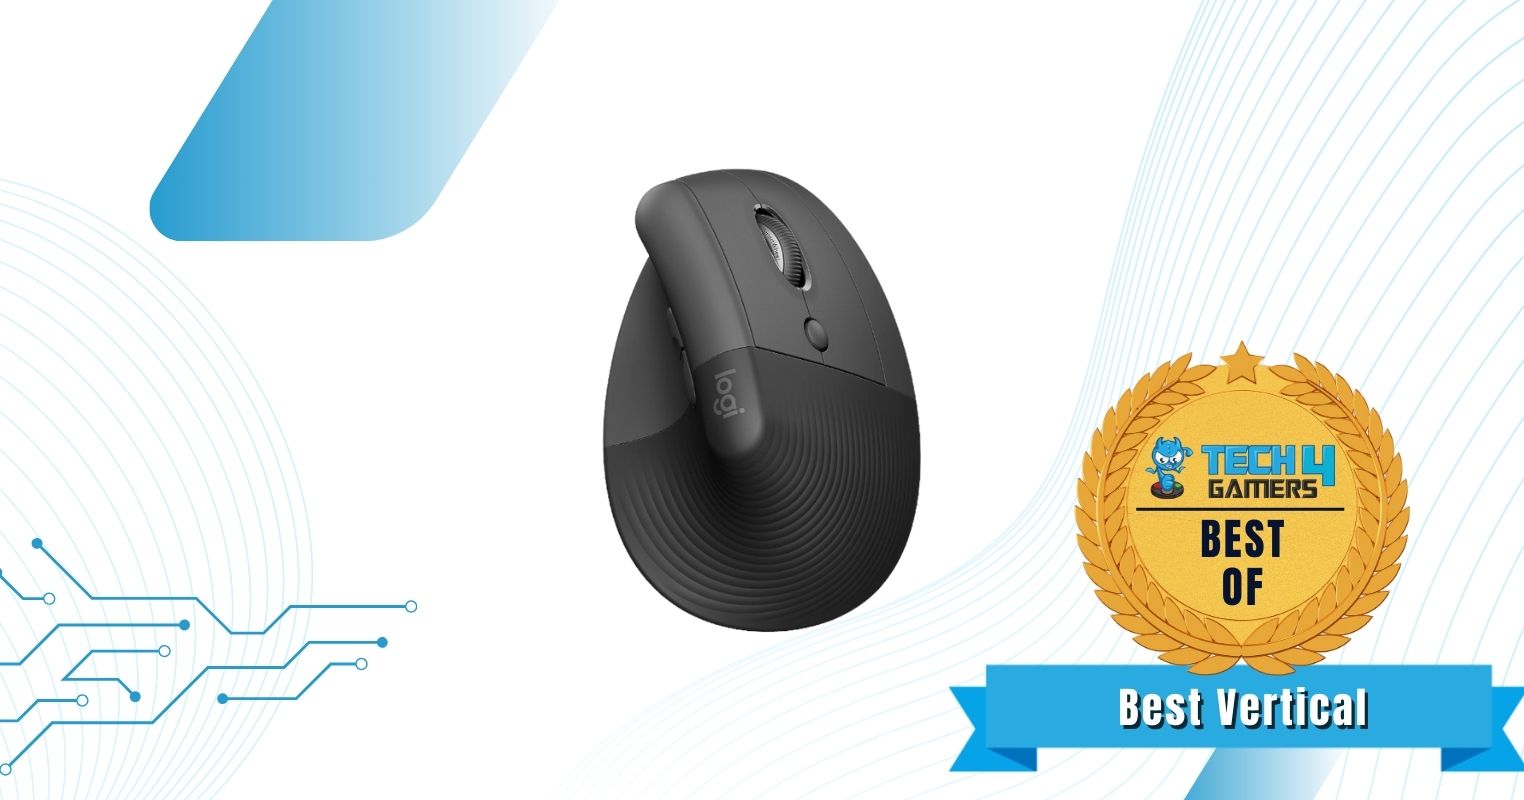 Lift Vertical Ergonomic Mouse - Best Vertical Mouse For Small Hands